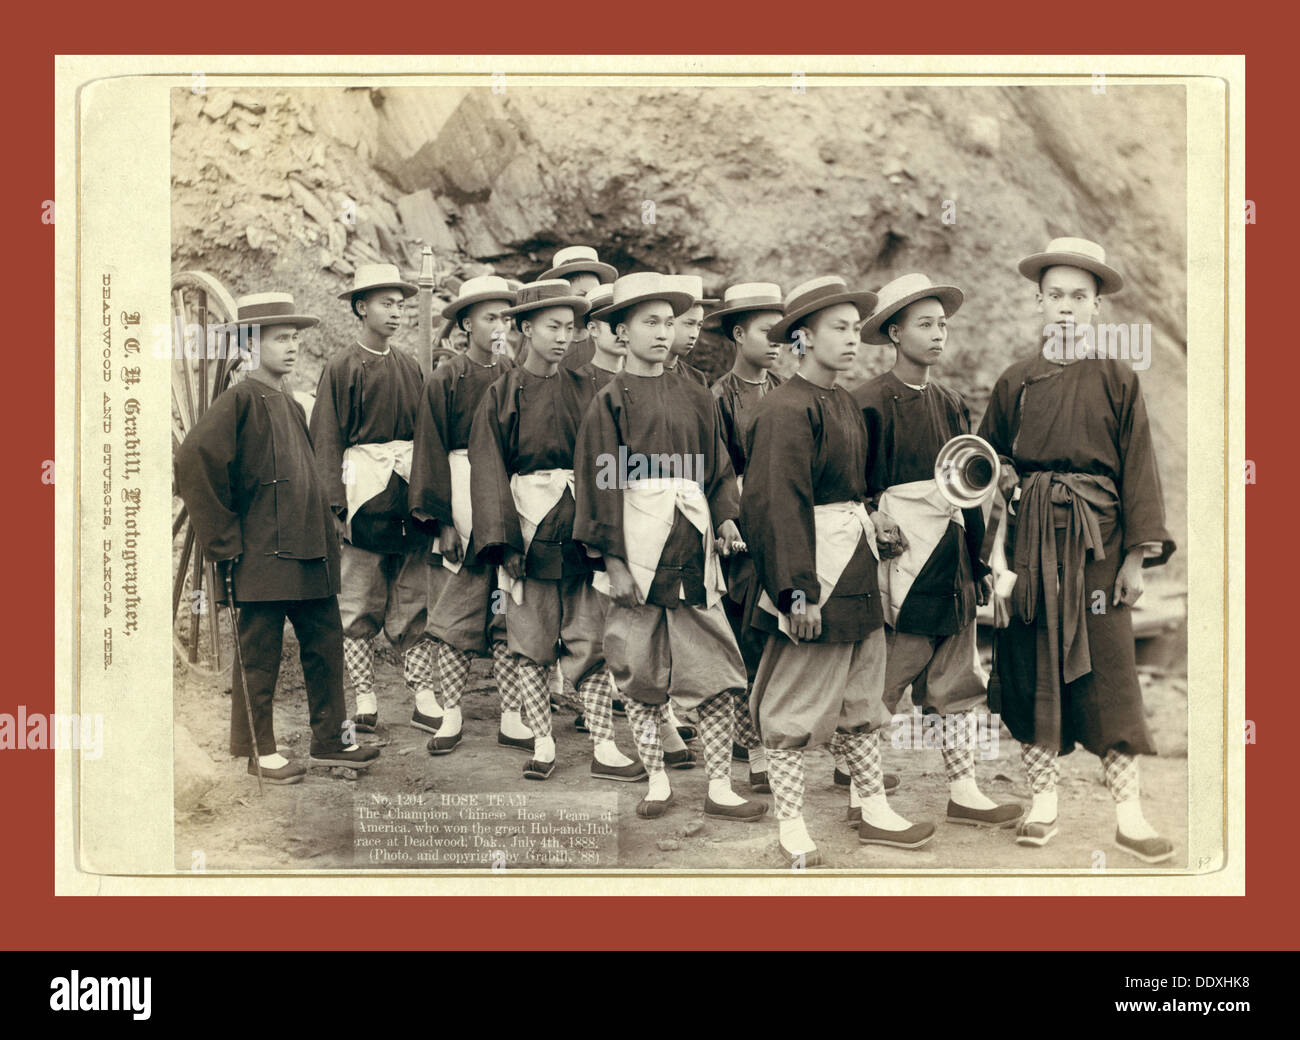 Hose team. The champion Chinese Hose Team of America, who won the great Hub-and-Hub race at Deadwood, Dak., 1888 Stock Photo